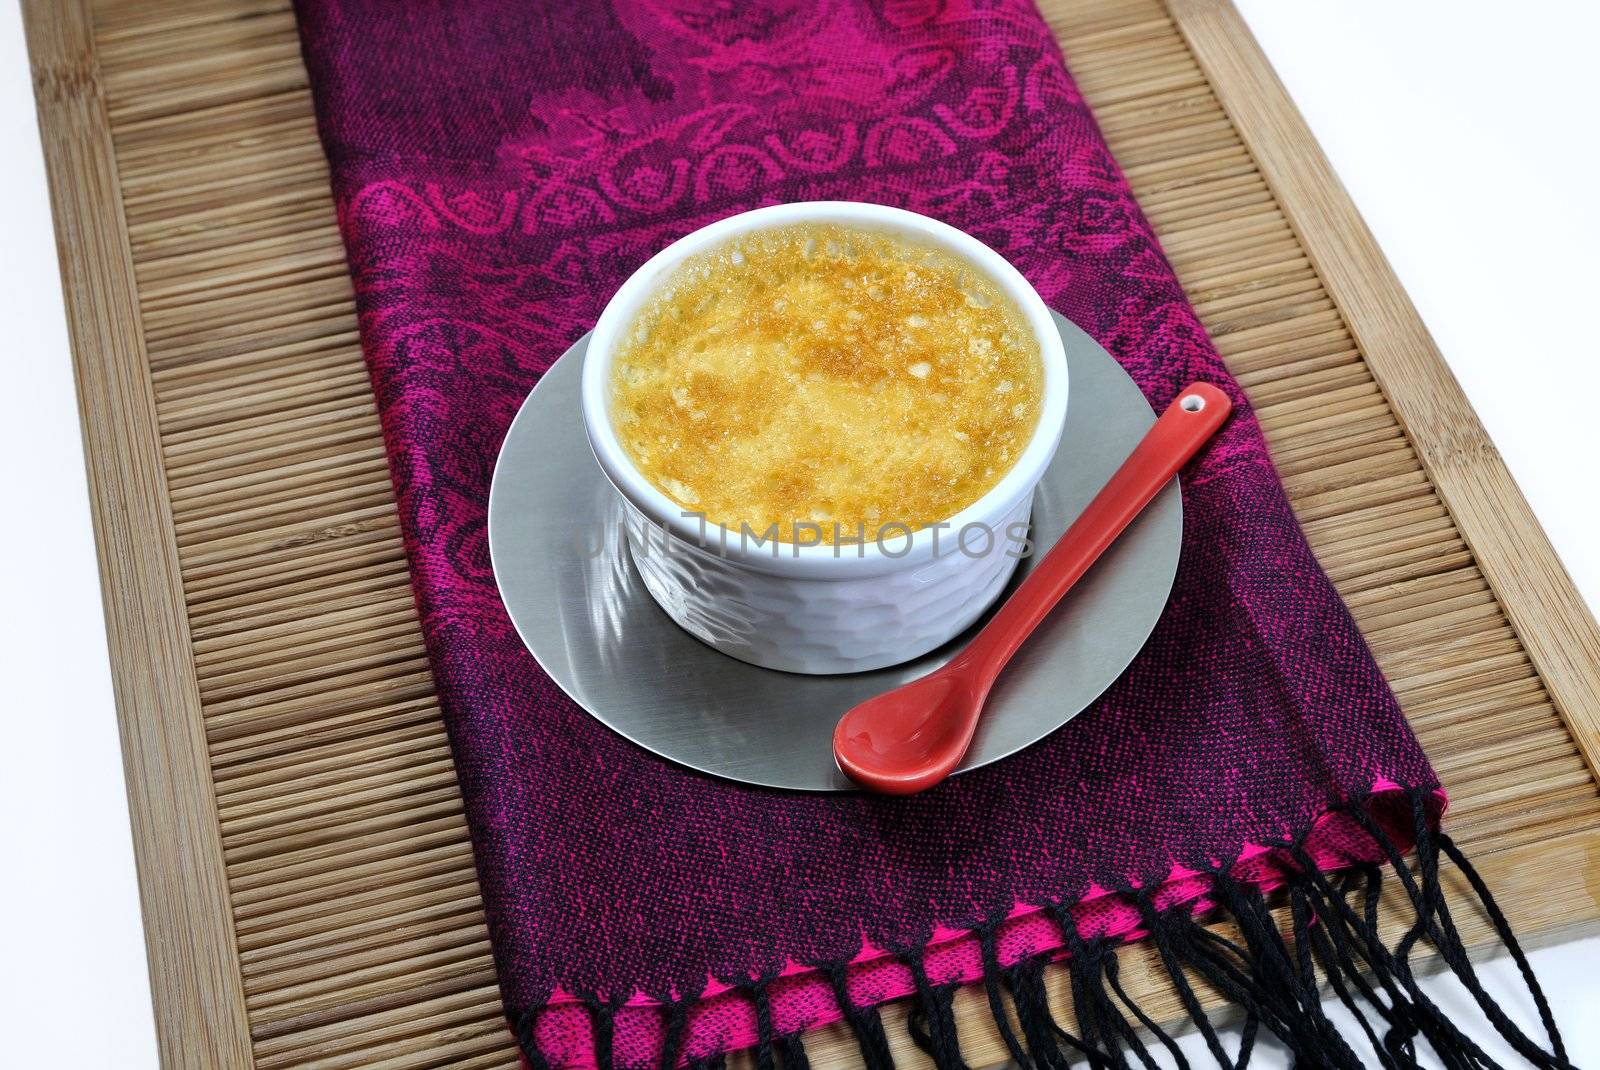 Indonesian tablecloth with a home-made custard and a little red ceramic spoon on a bamboo tray